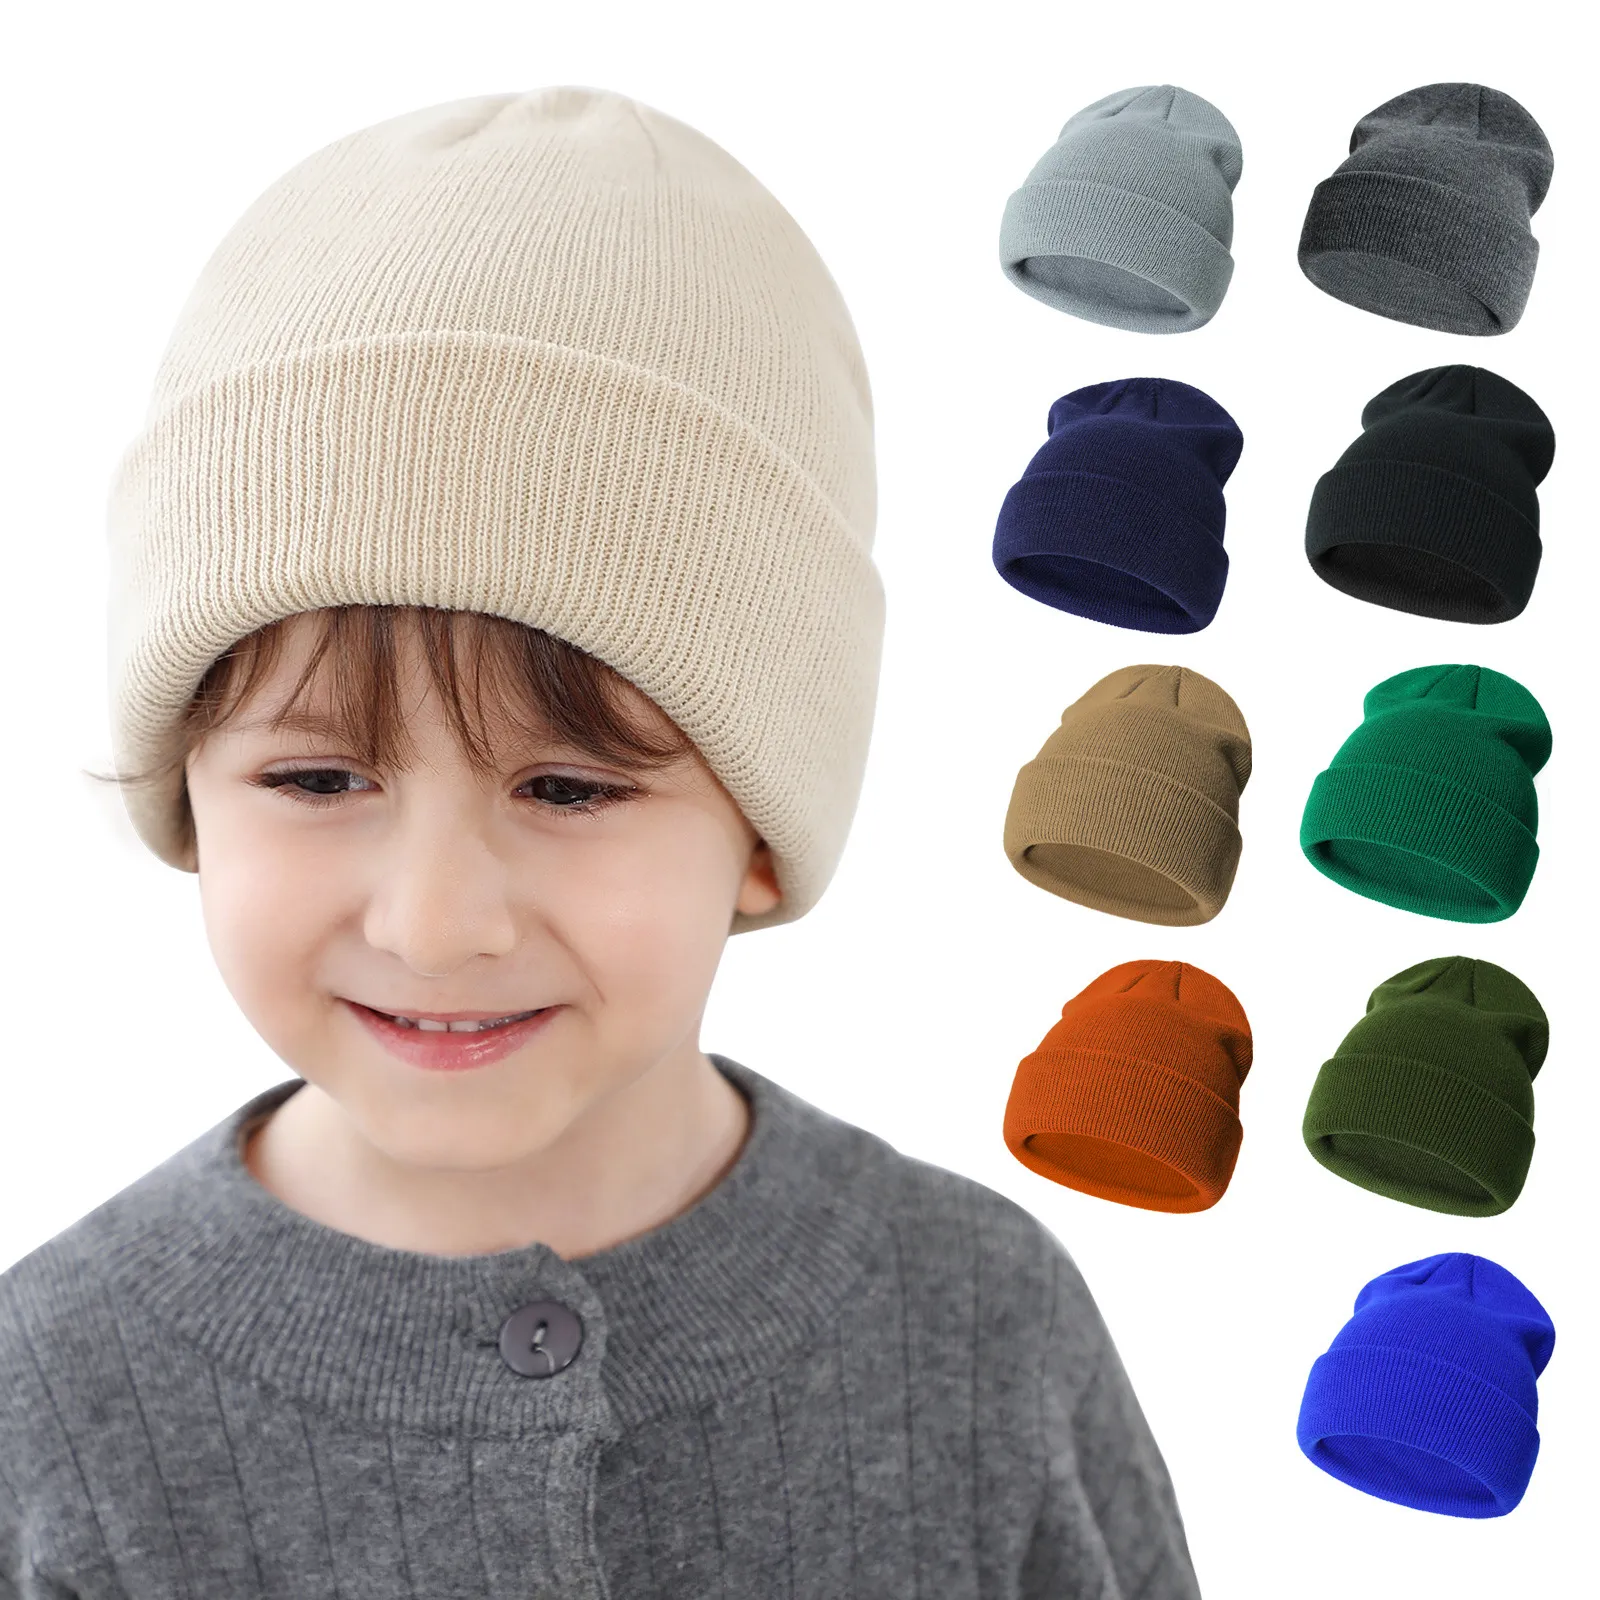 Baby Acrylic Beanies Knitted Plain Winter Slouchy Hats for 0-6 Years Children Head Ears Warmer 18 Solid Color Orange White Yellow Black Grey Pink Beige